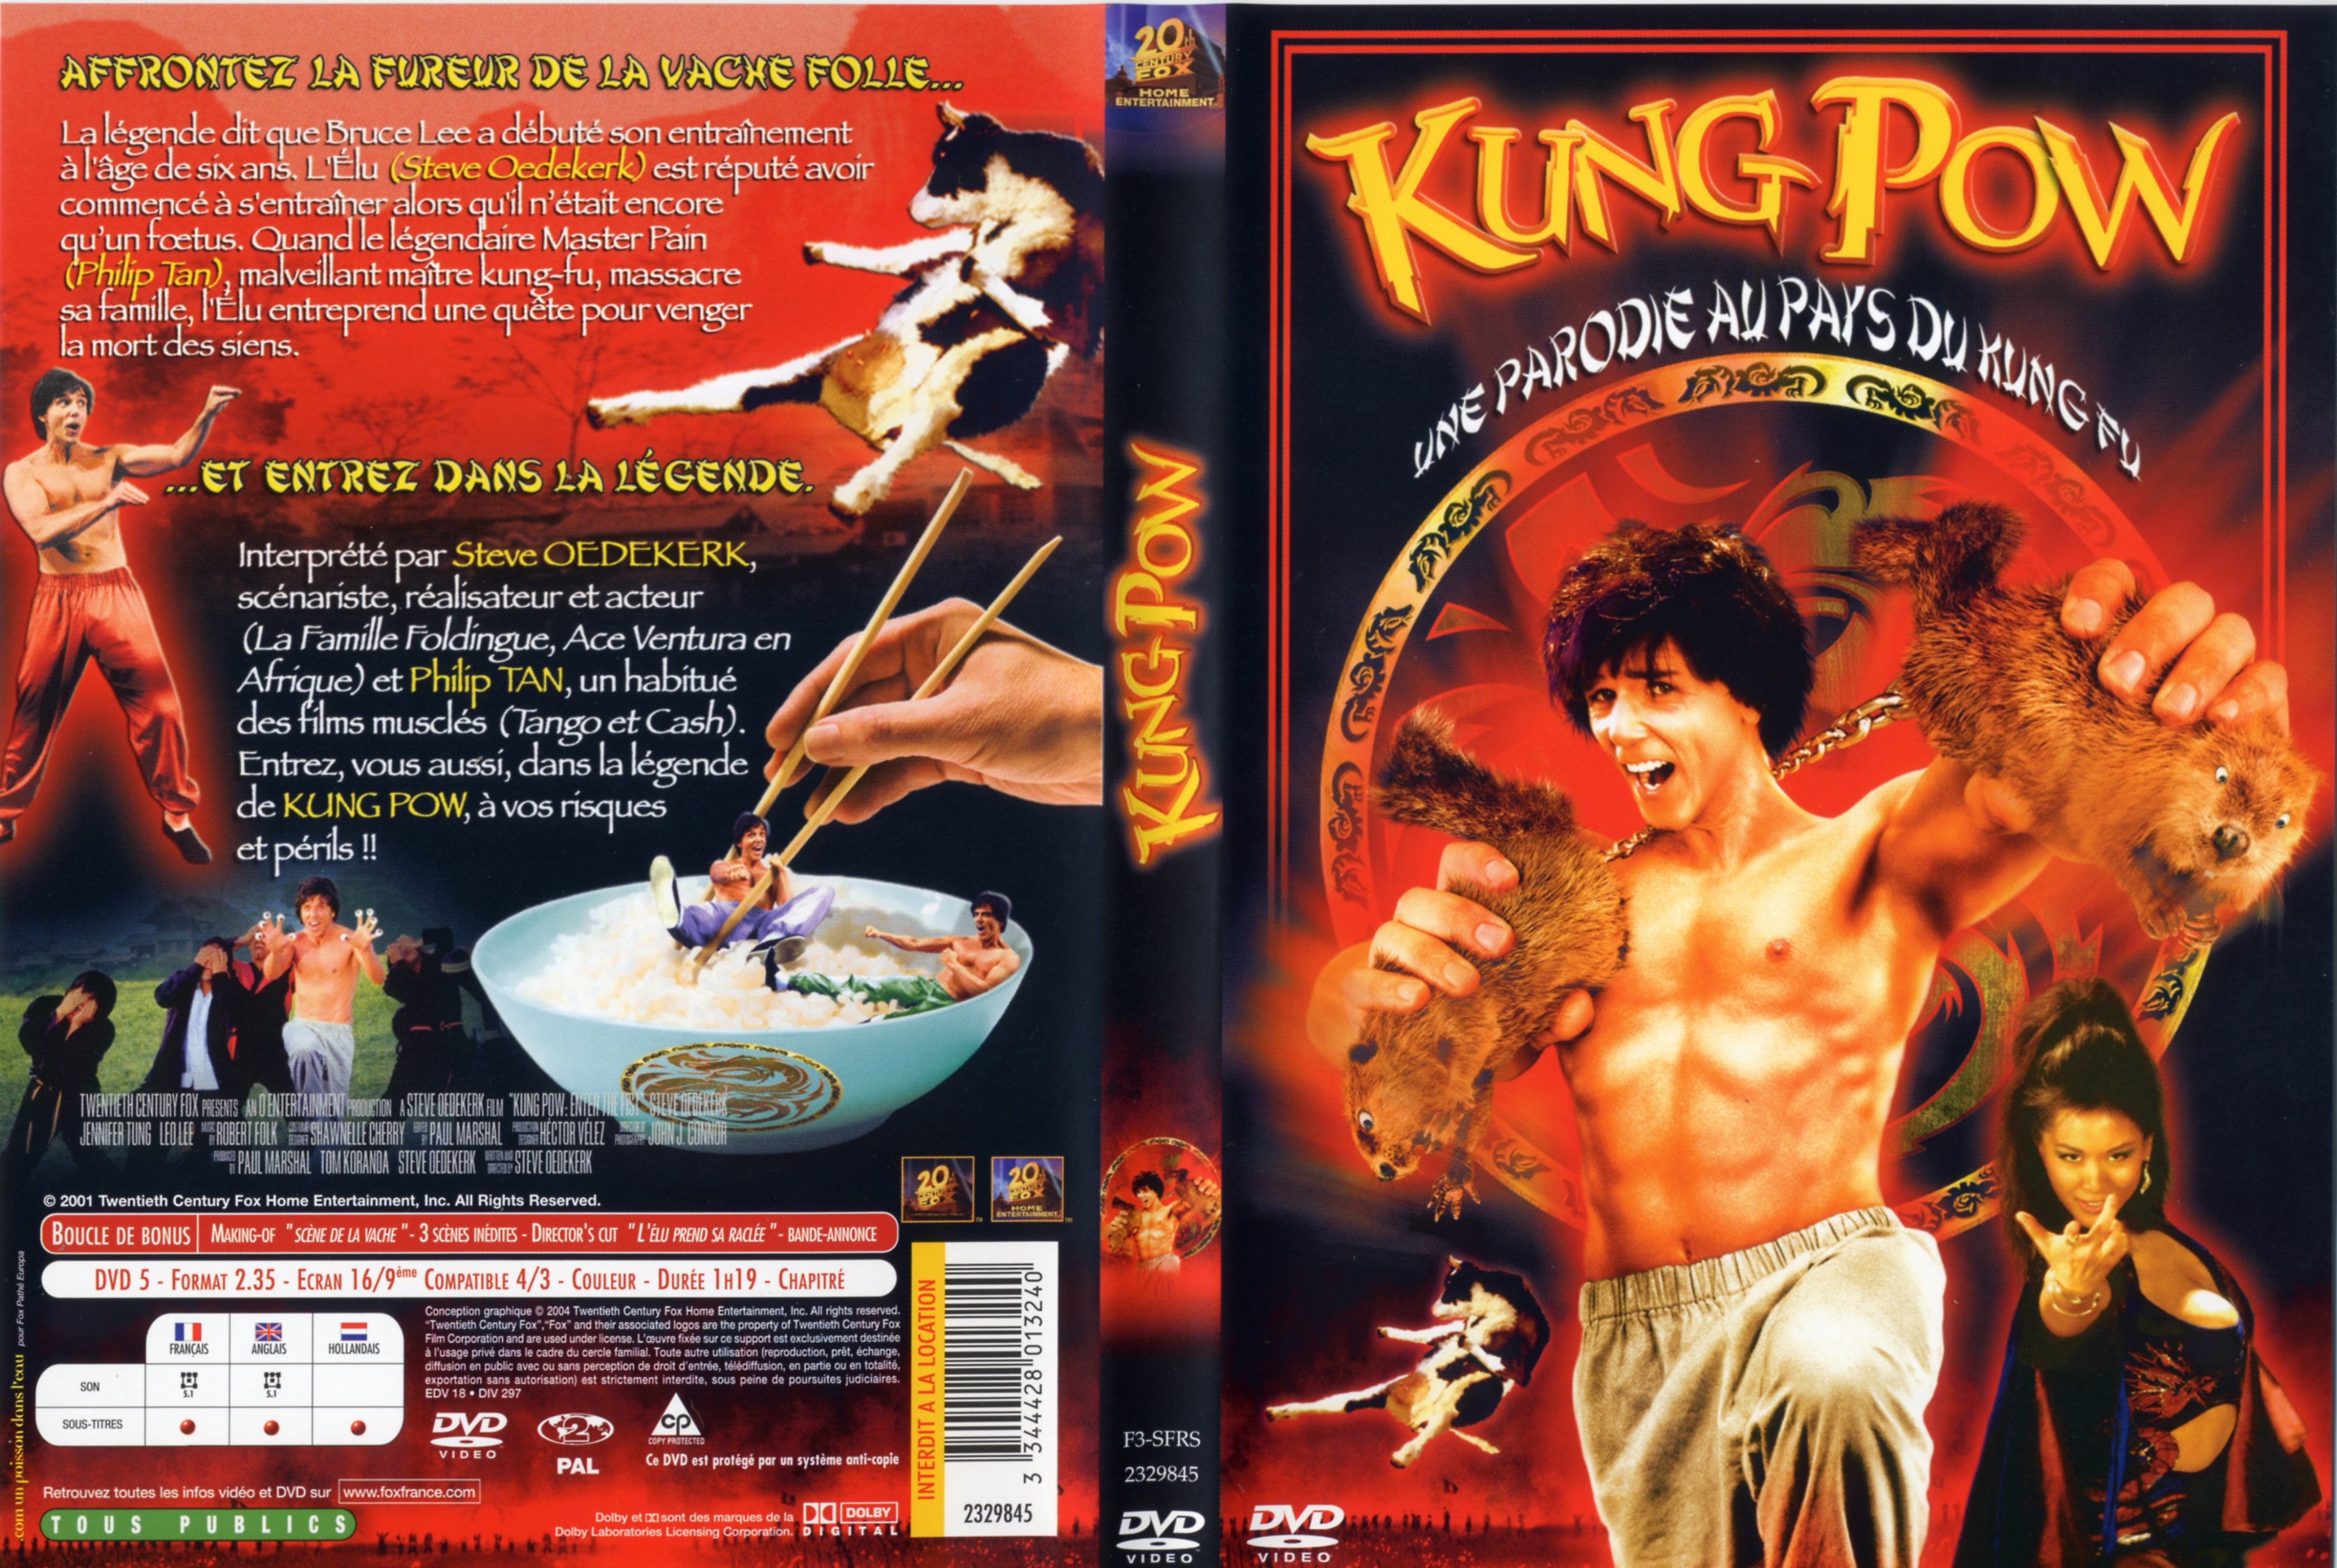 Jaquette DVD Kung pow